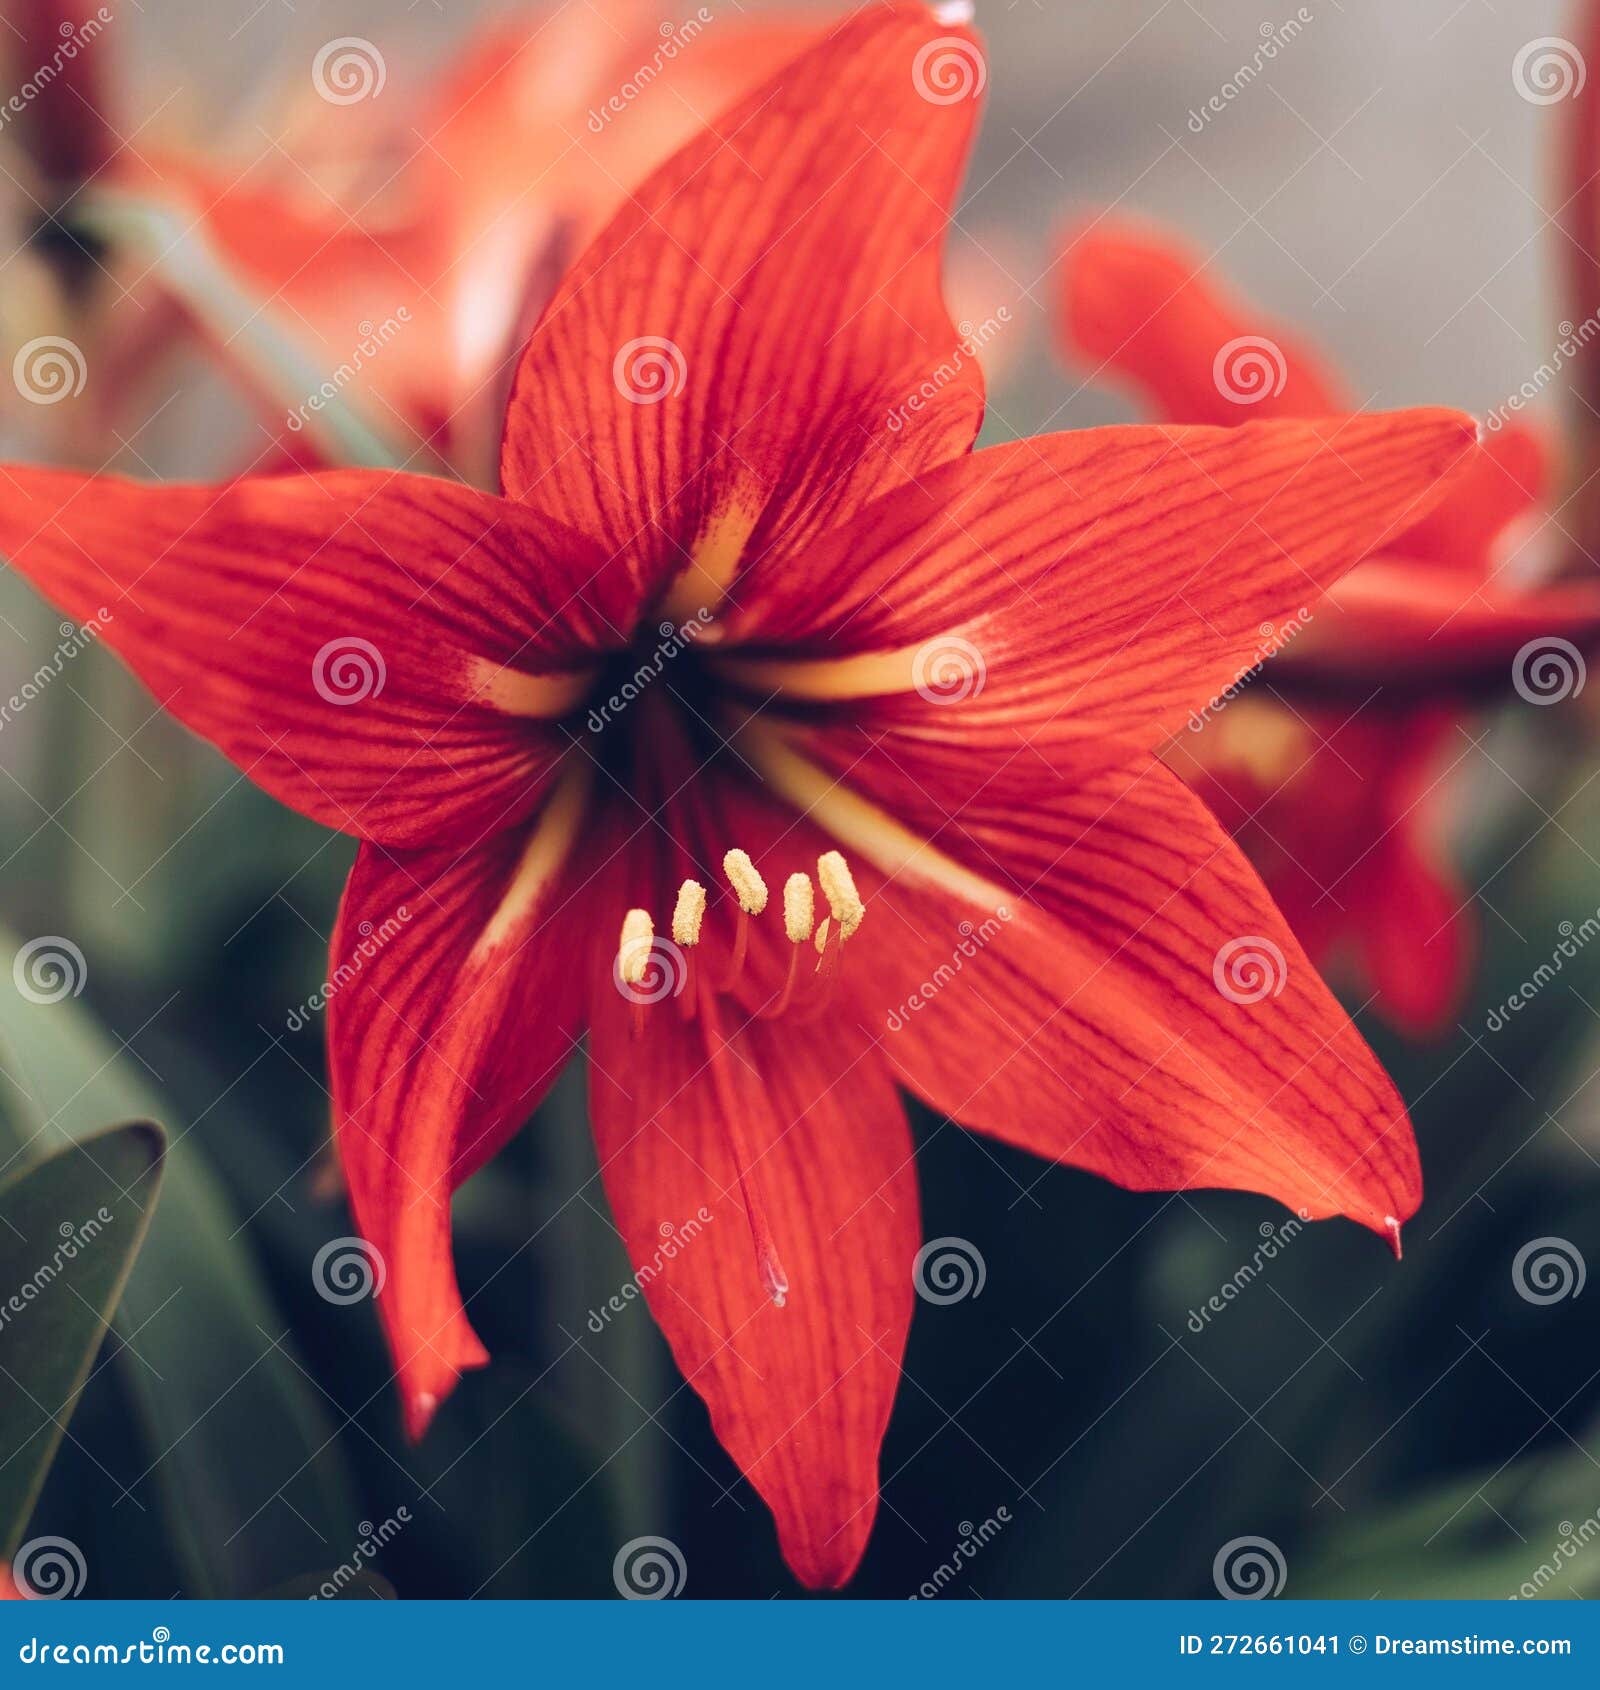 Vivid Closeup of a Vibrant Red Lily Flower with Lush Green Foliage ...